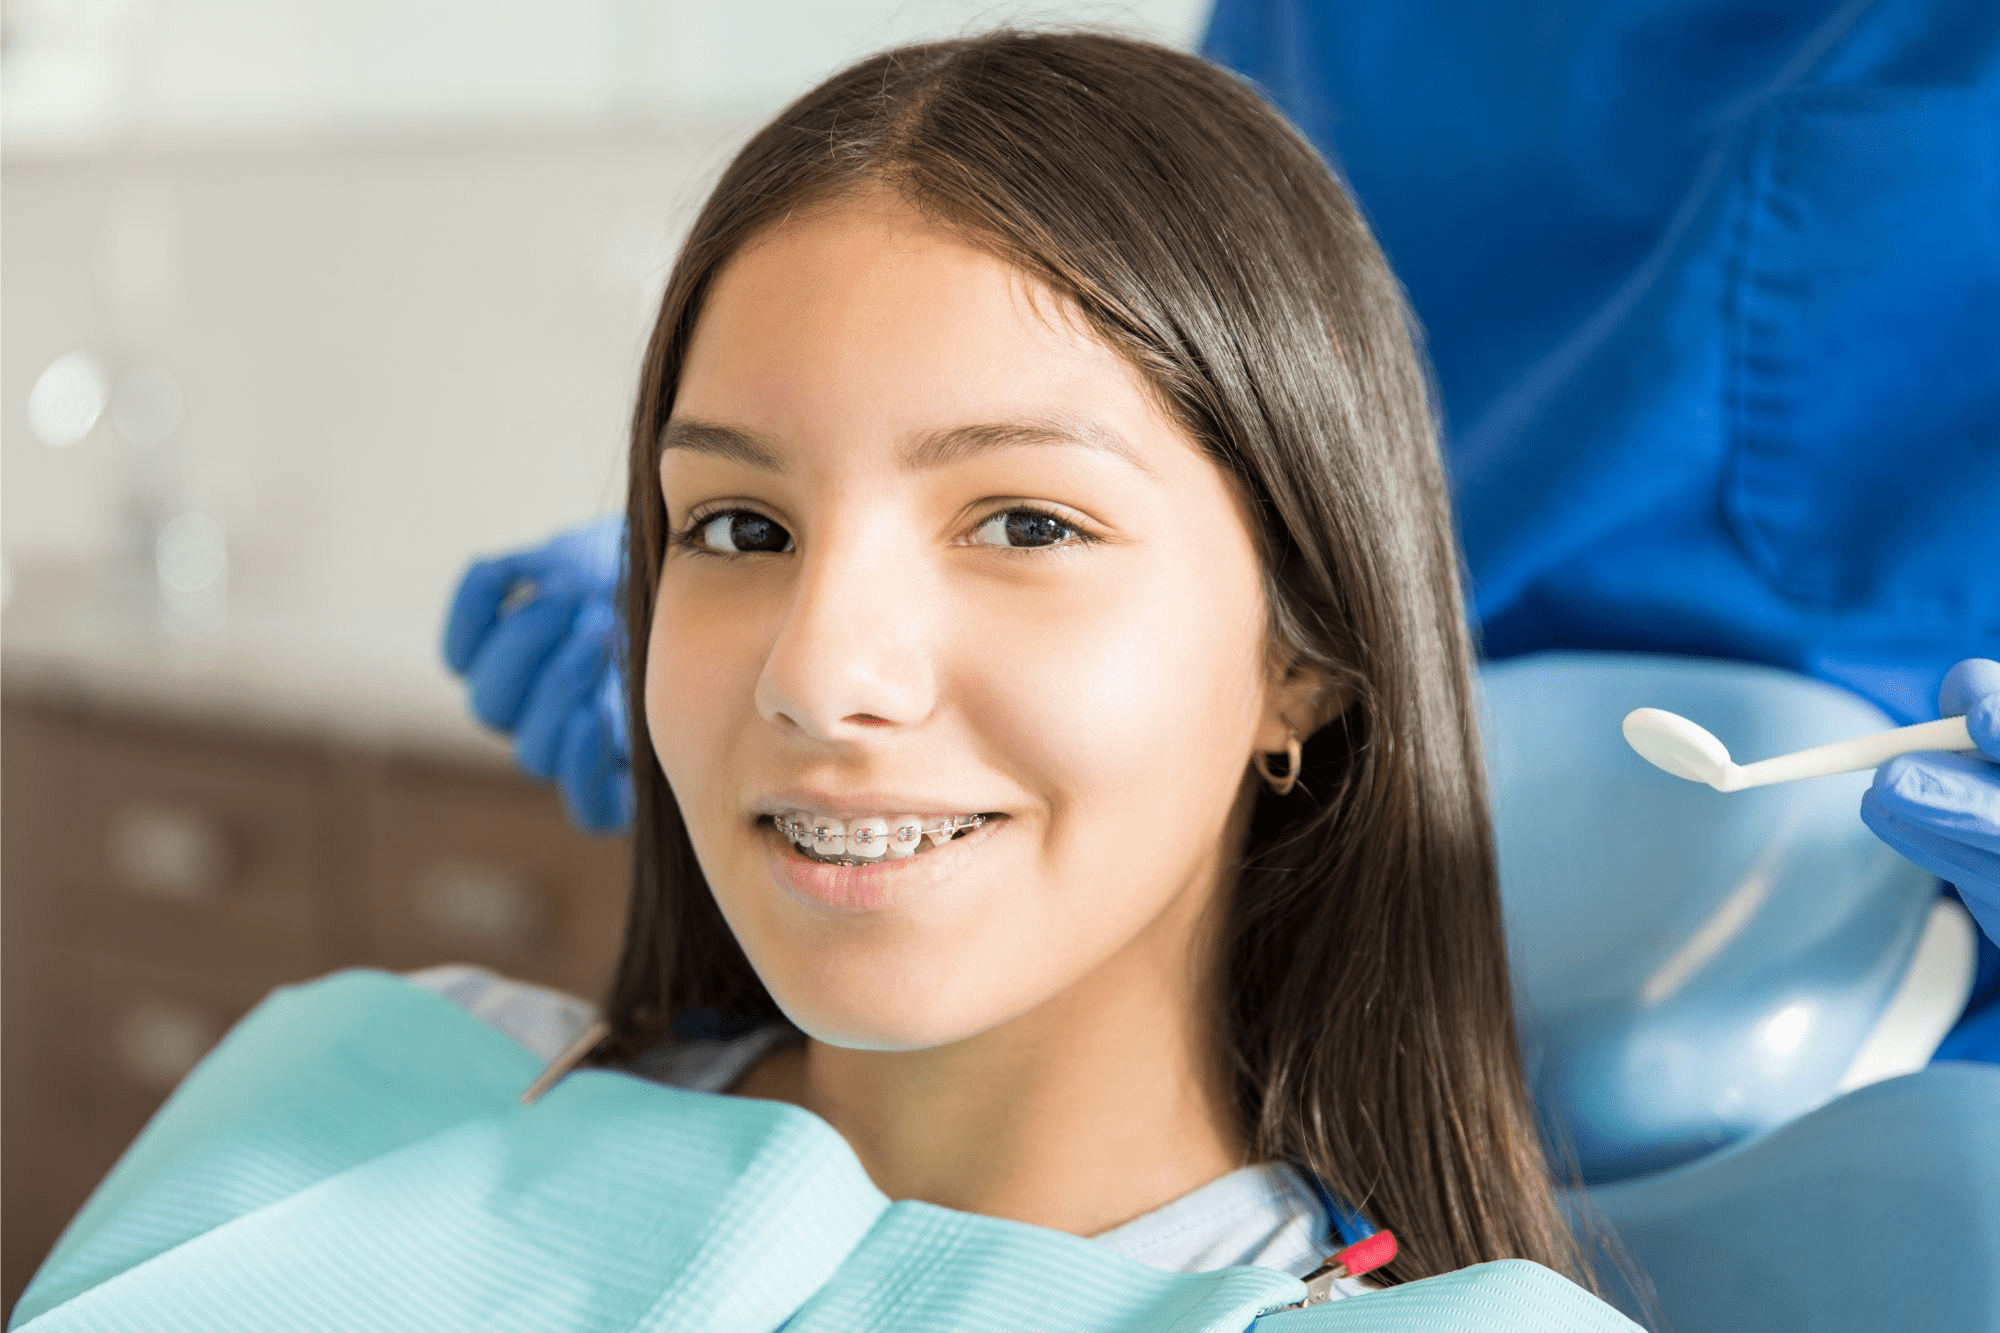 We are here for your orthodontic emergencies